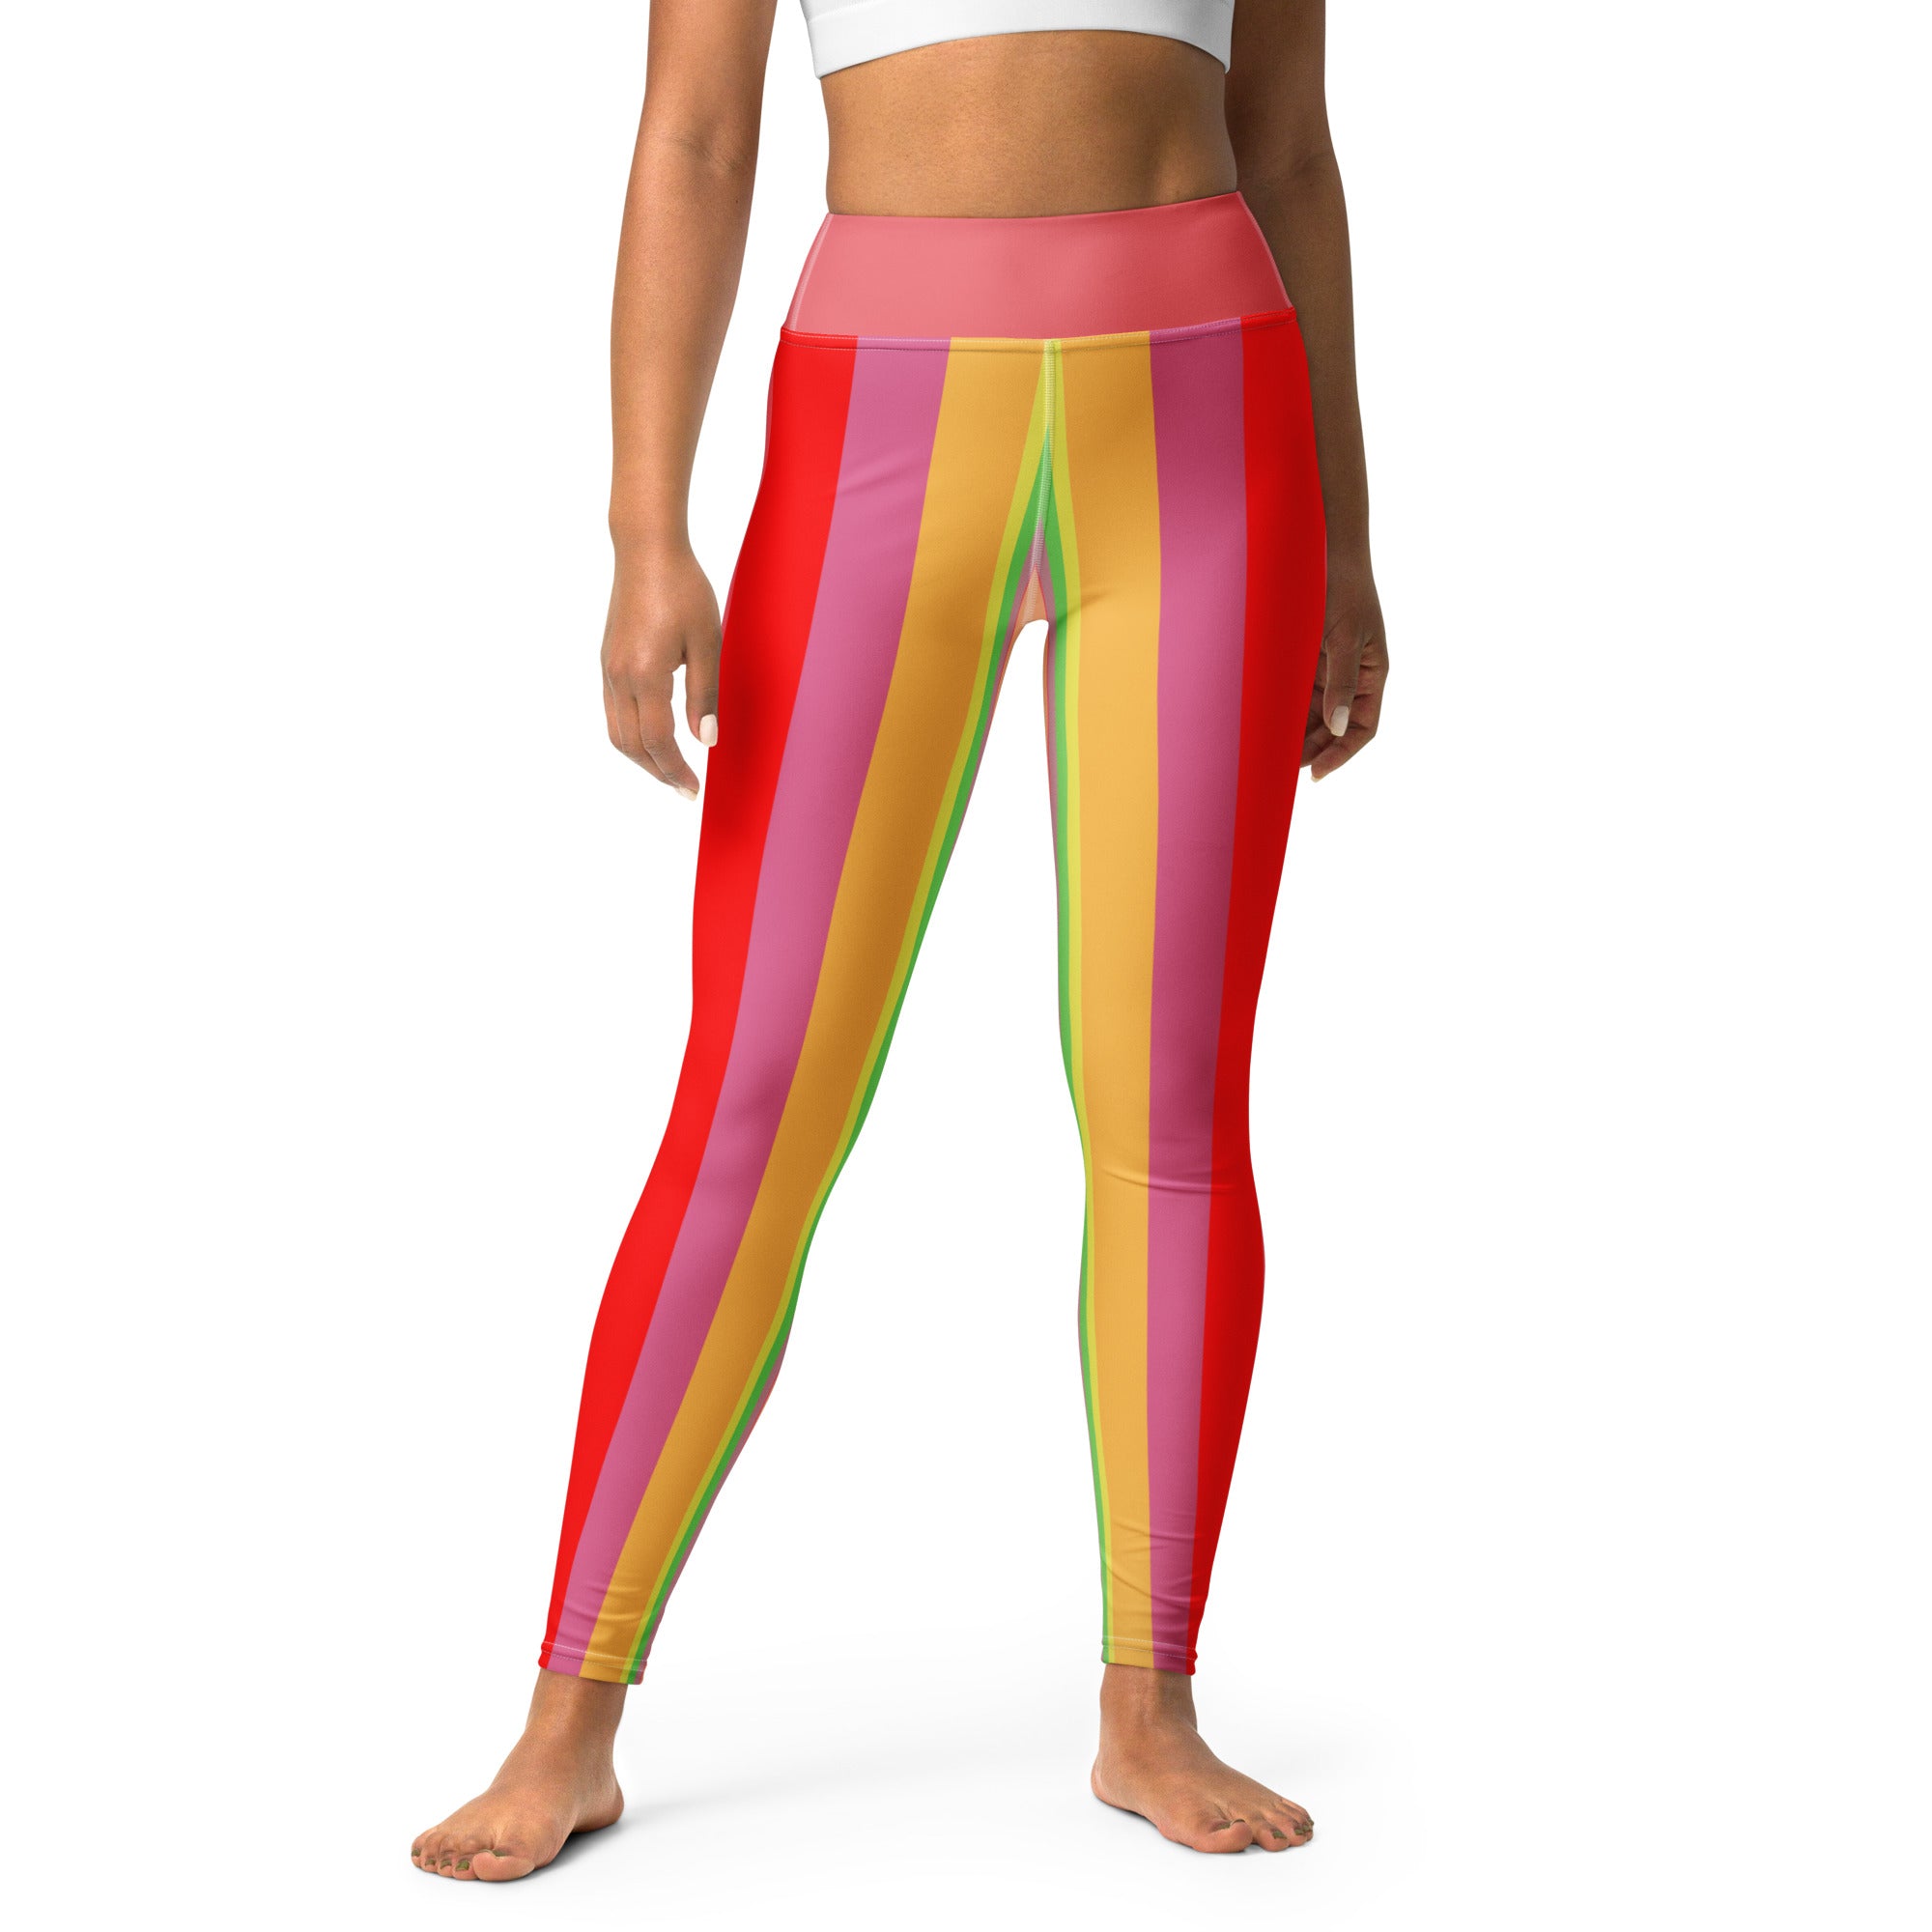 Bright, cheerful yoga leggings featuring a cascading rainbow design for style and comfort.